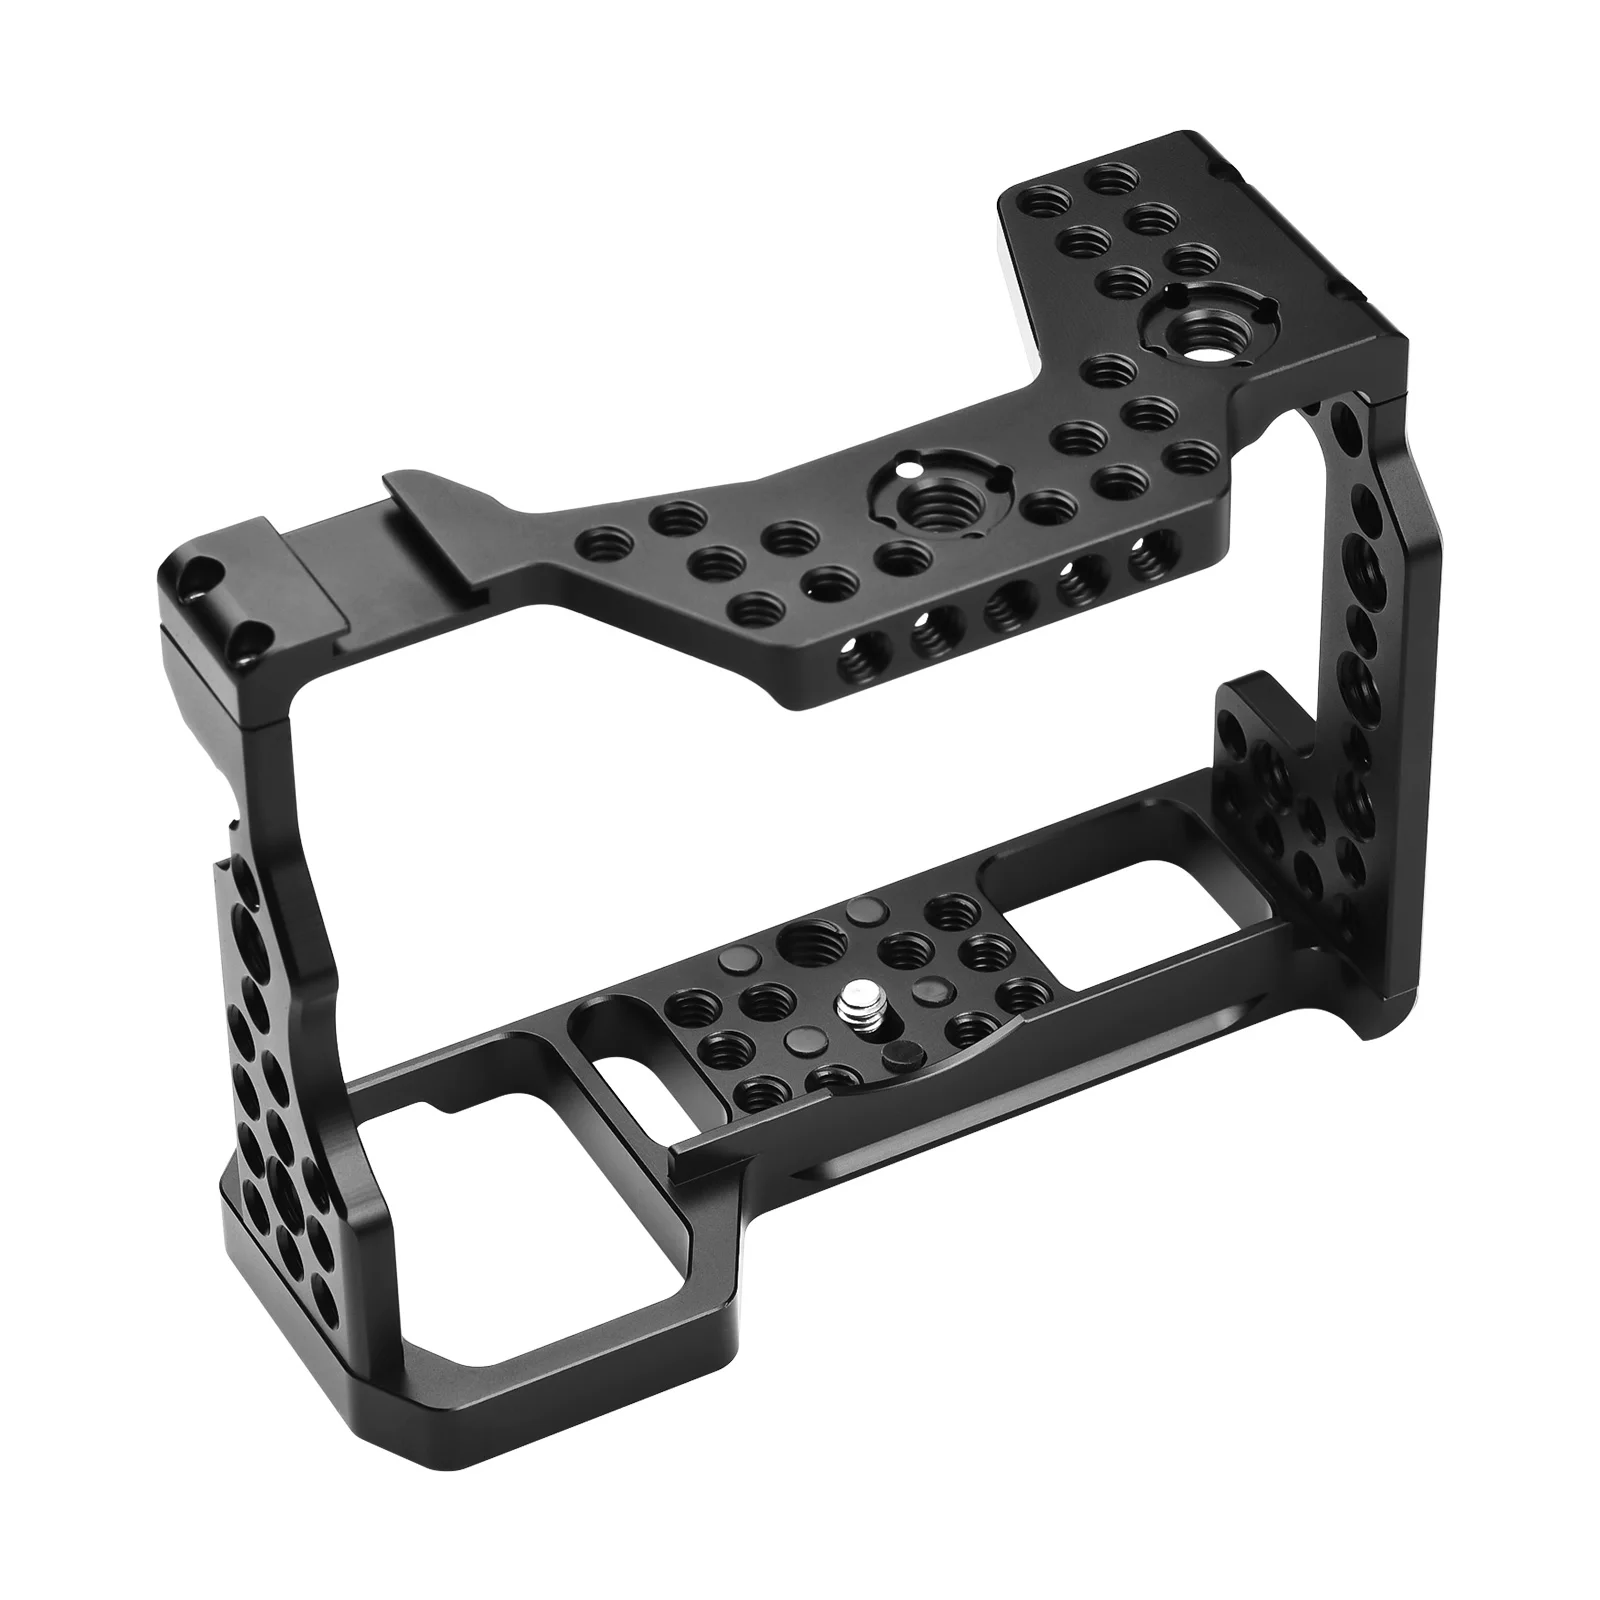 

Camera Cage Aluminum Alloy Video Cage for Sony A7M3 A7R3 A9 Mirrorless Camera Cold Shoe Mount 1/4 Inch & 3/8 Inch Screw Holes